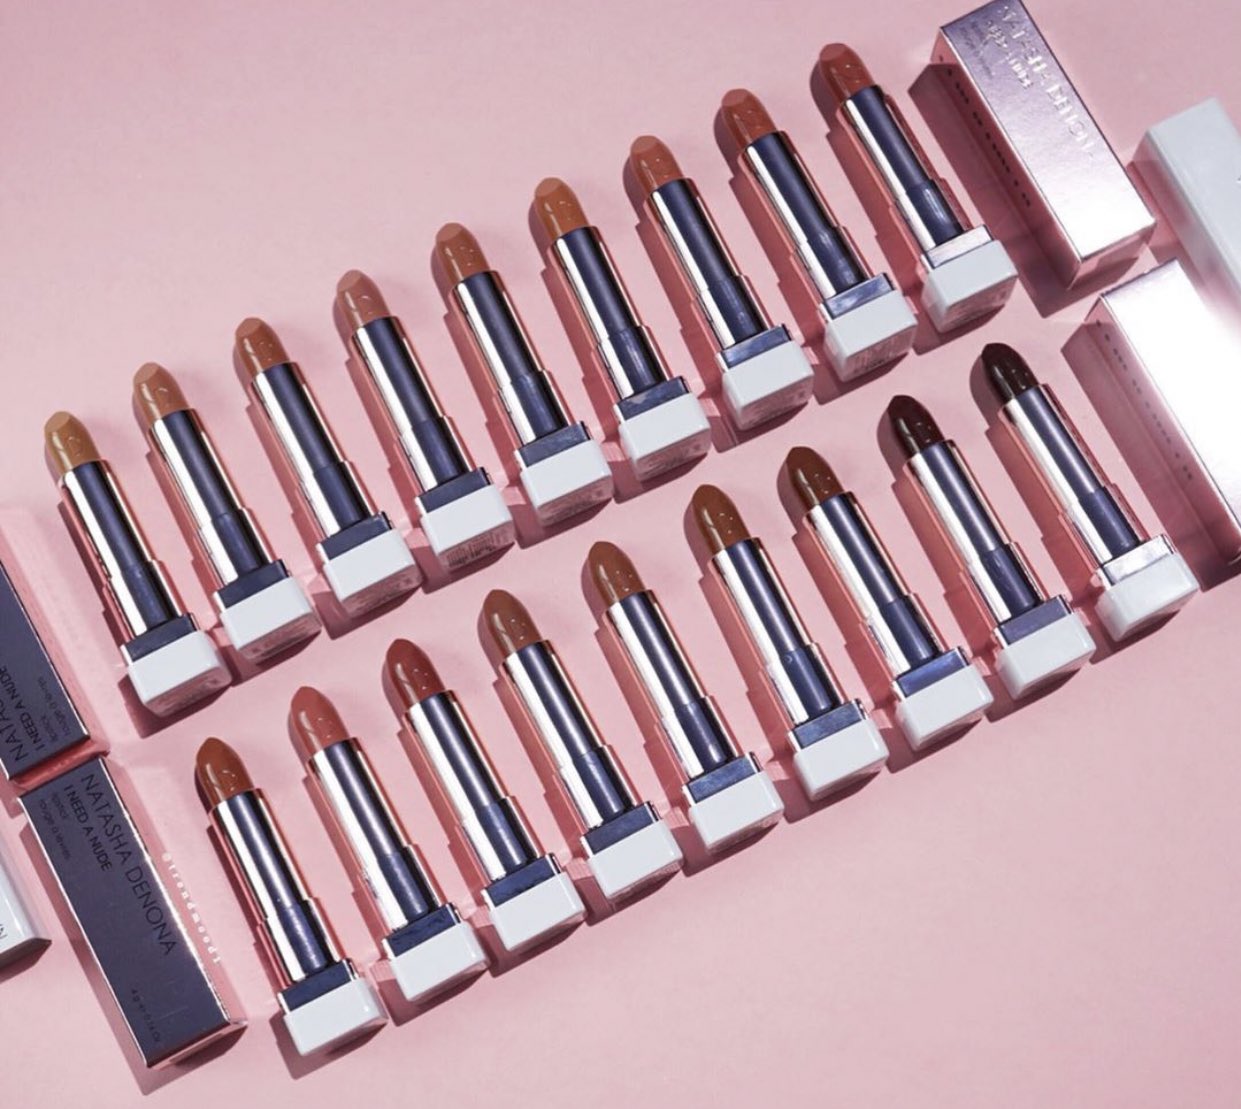 X 上的Trendmood：「#REVEALED 🚨 NEW! #LIPSTICKS 💄😍💗 The I NEED A NUDE  #Collection by @Natasha_Denona a collection of 18 universally flattering  shades in 4 distinct undertones $25 each: -Beige -Neutral Beige -Neutral